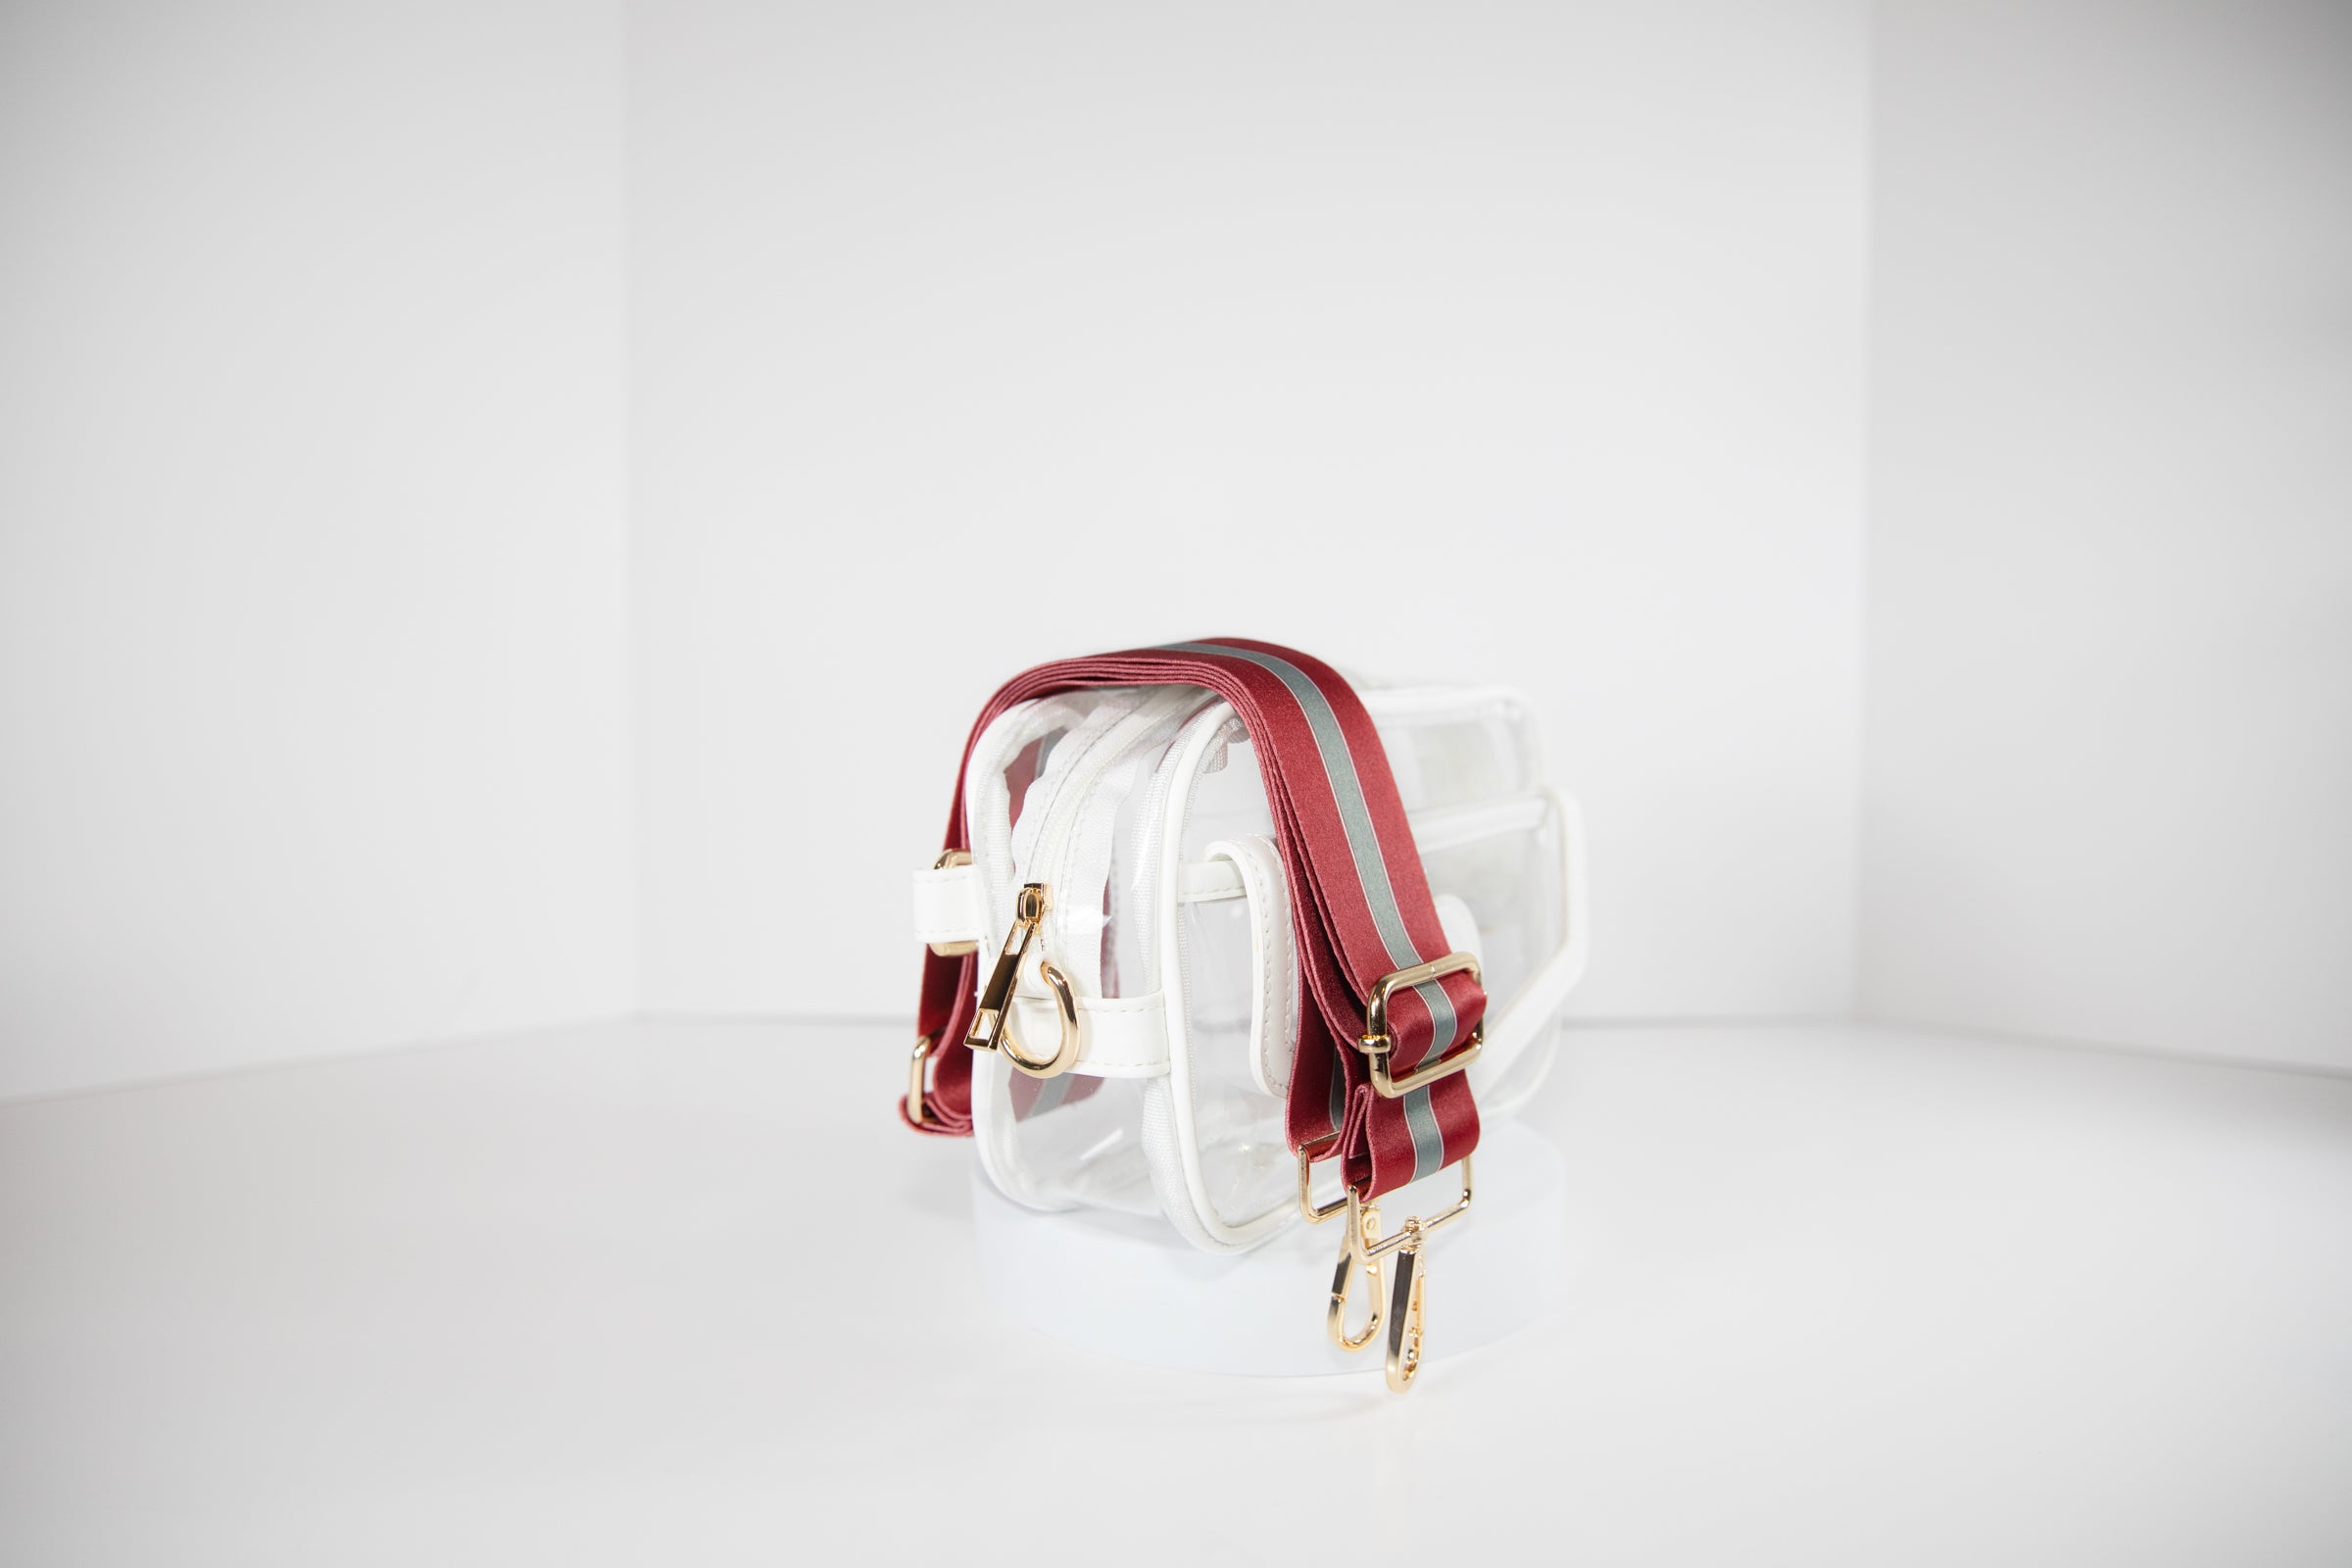 Clear stadium bag with white leather trim, side facing, with a crossbody strap in team colors of Alabama Crimson Tide.